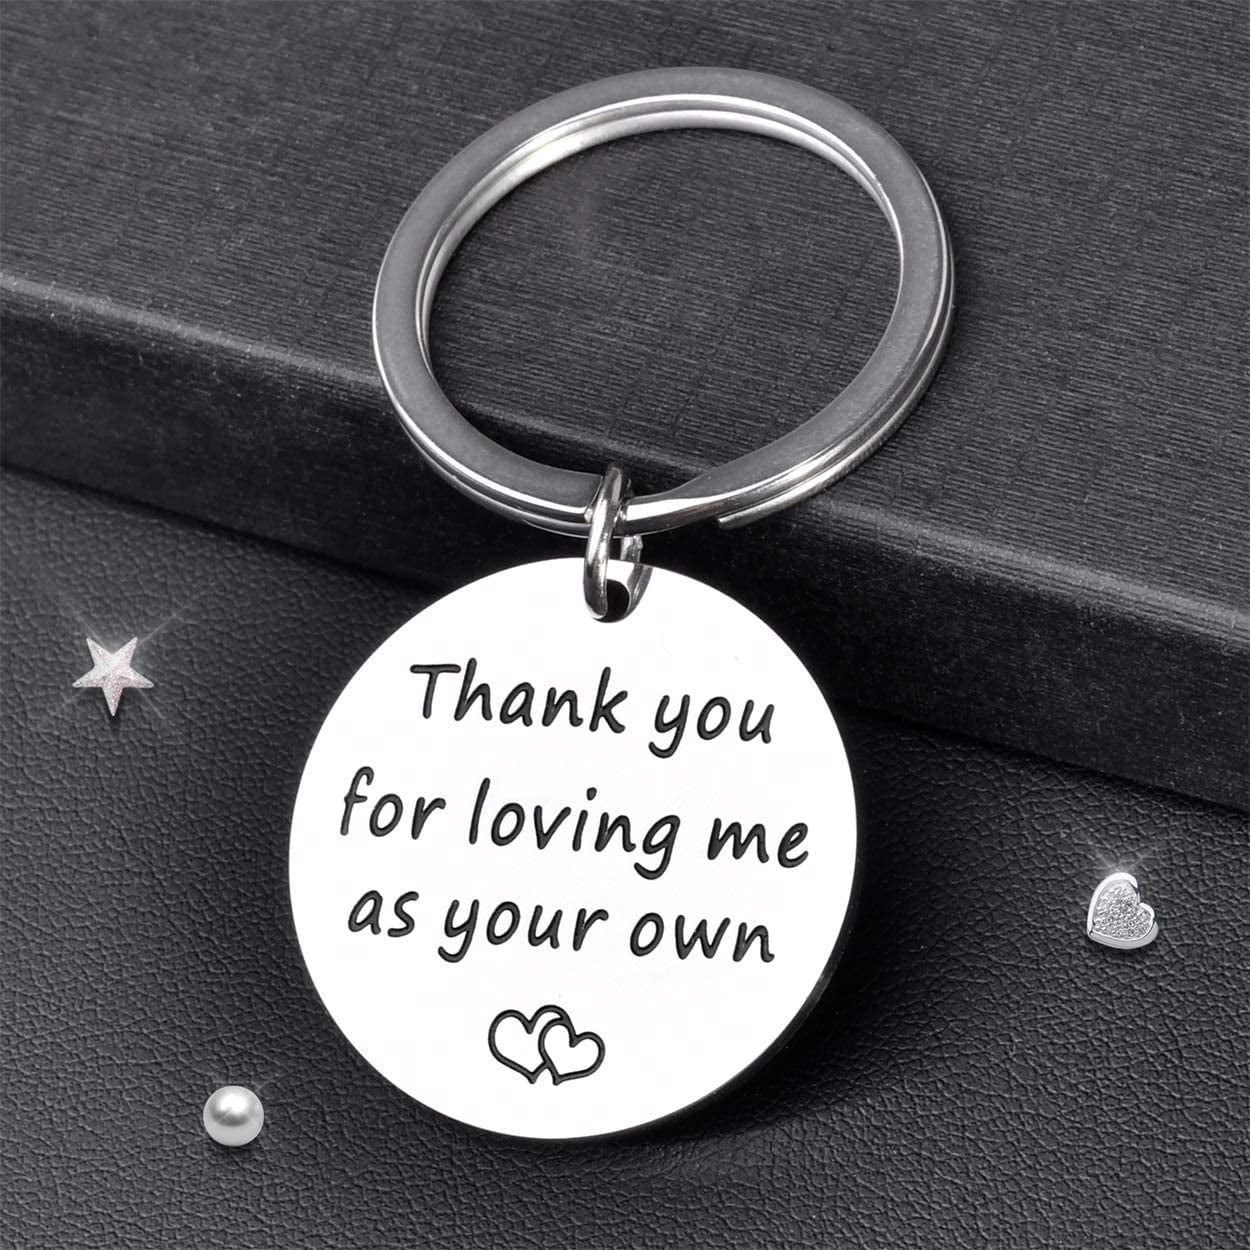 Gifts Keychain Mom Dad Step Father Mother Birthday Fathers Mothers Day Wedding 